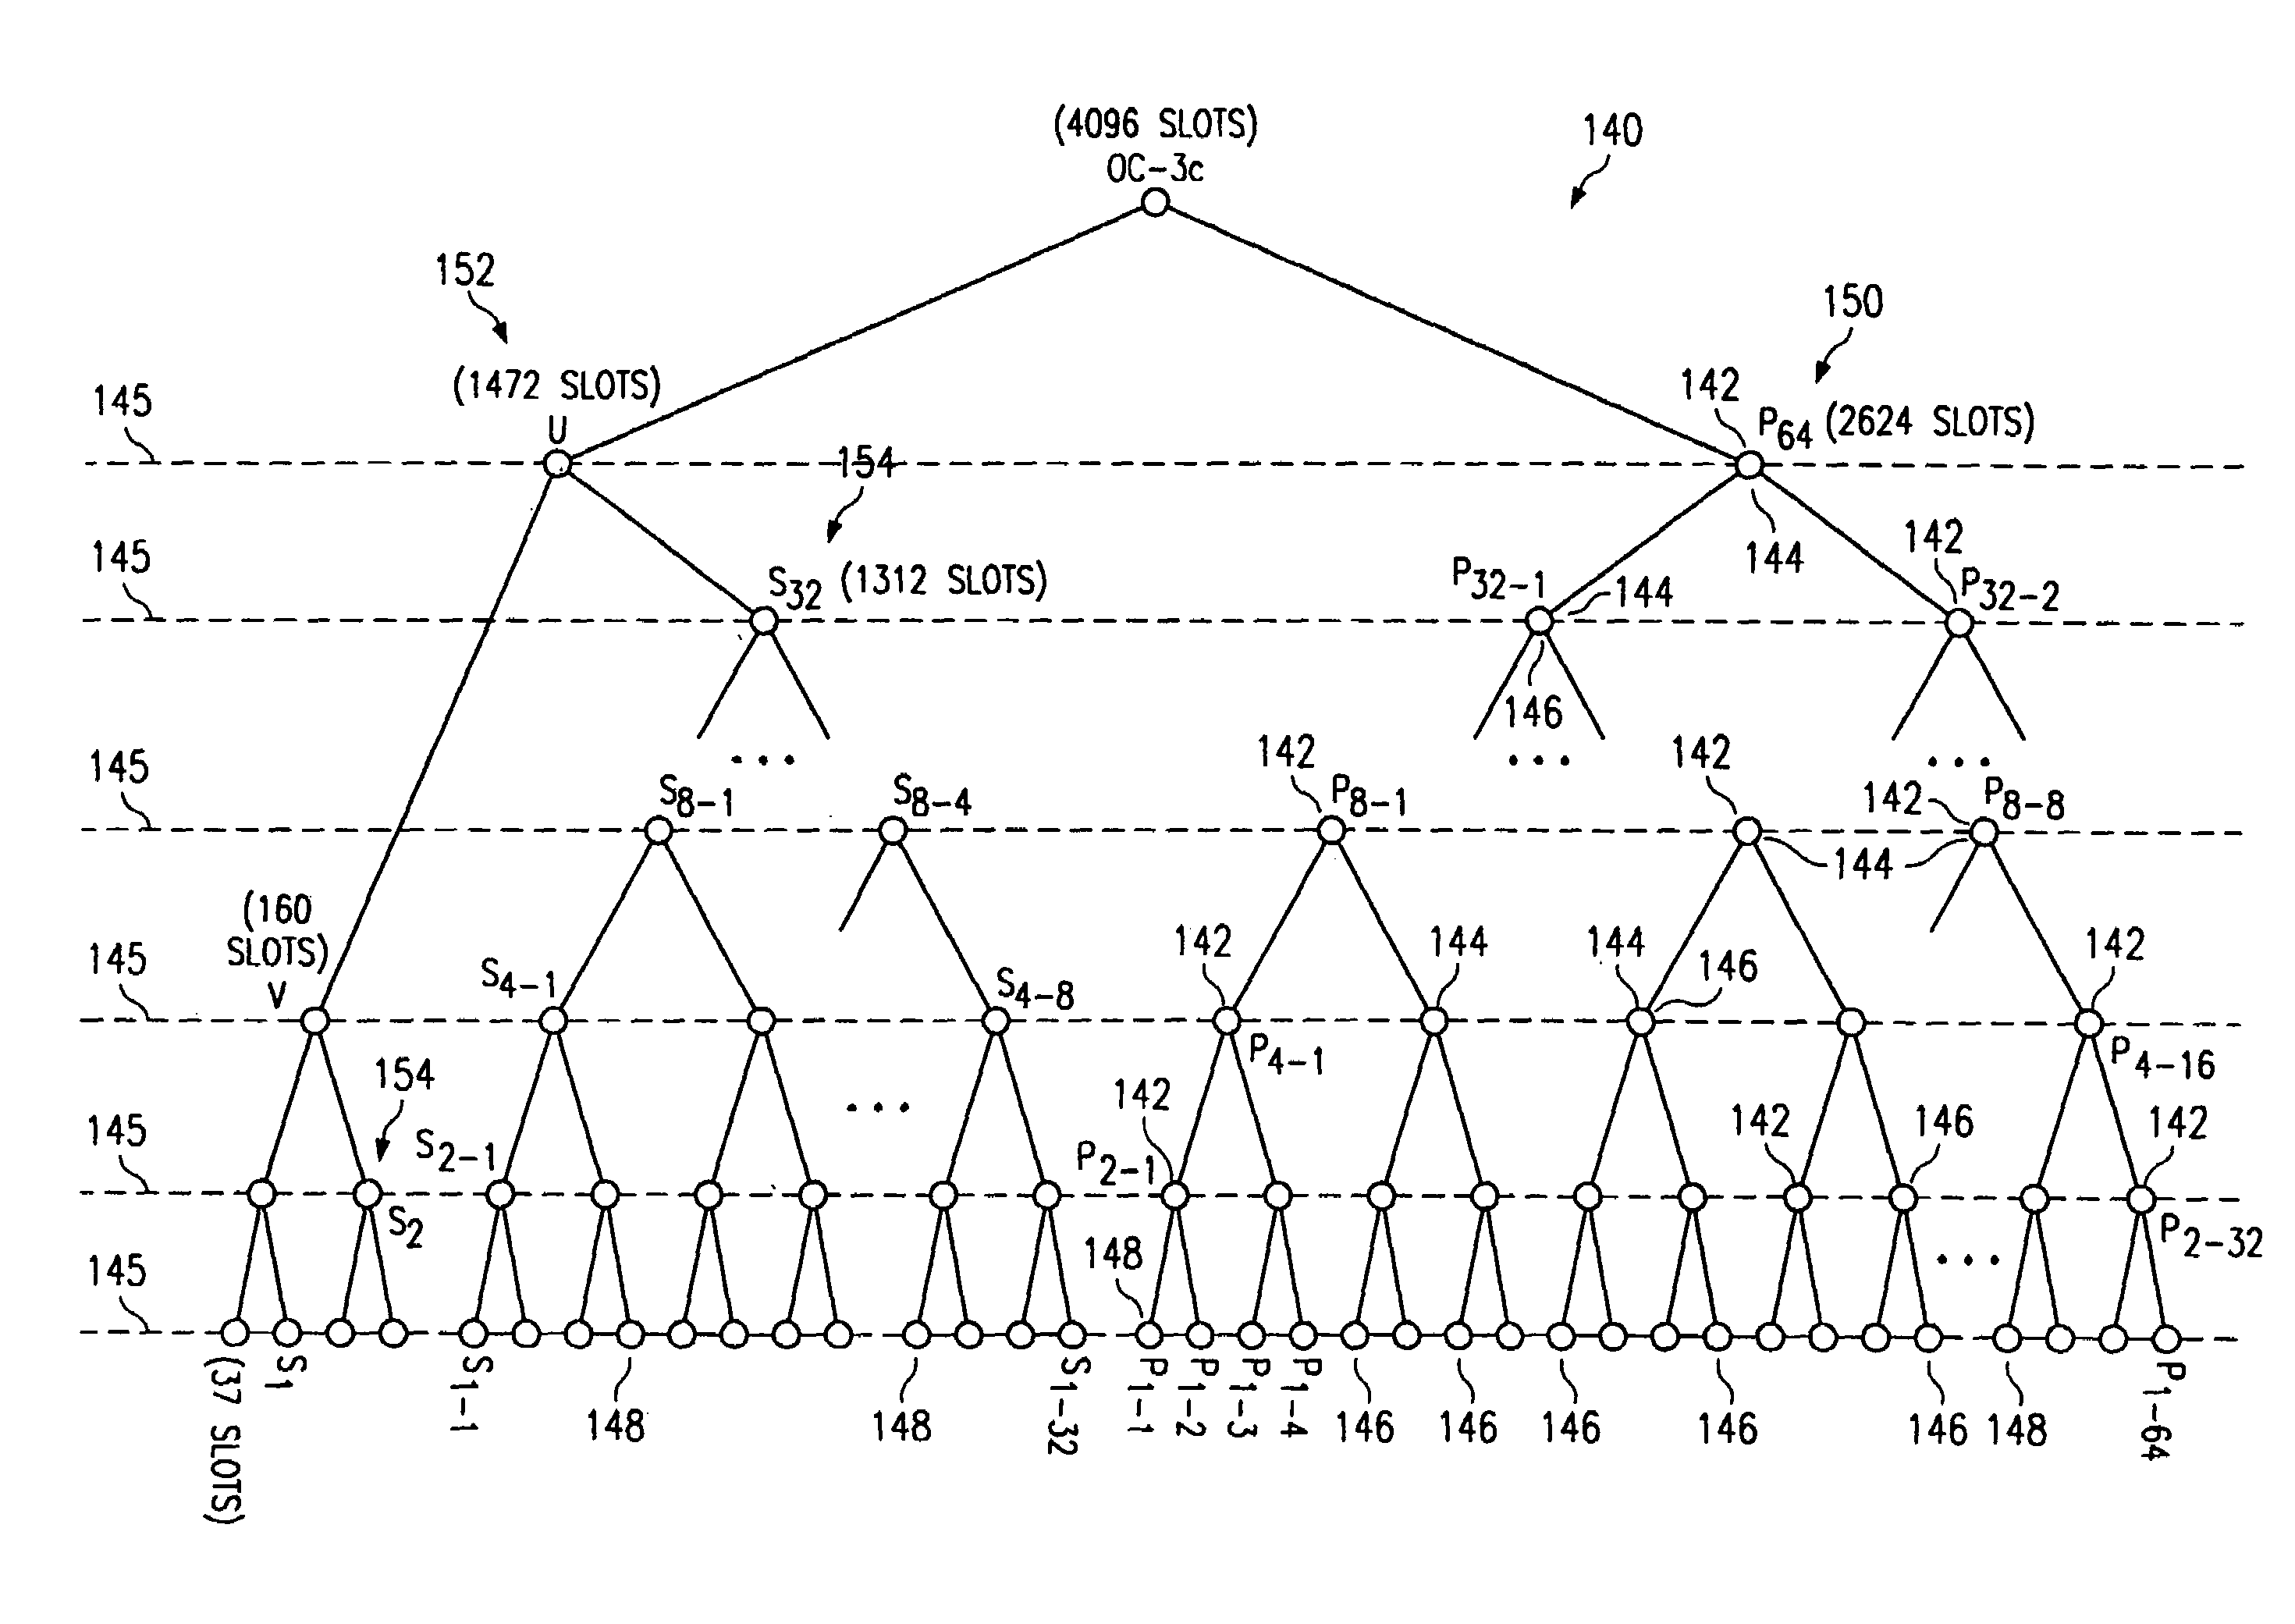 Transmission slot allocation method and map for virtual tunnels in a transmission line